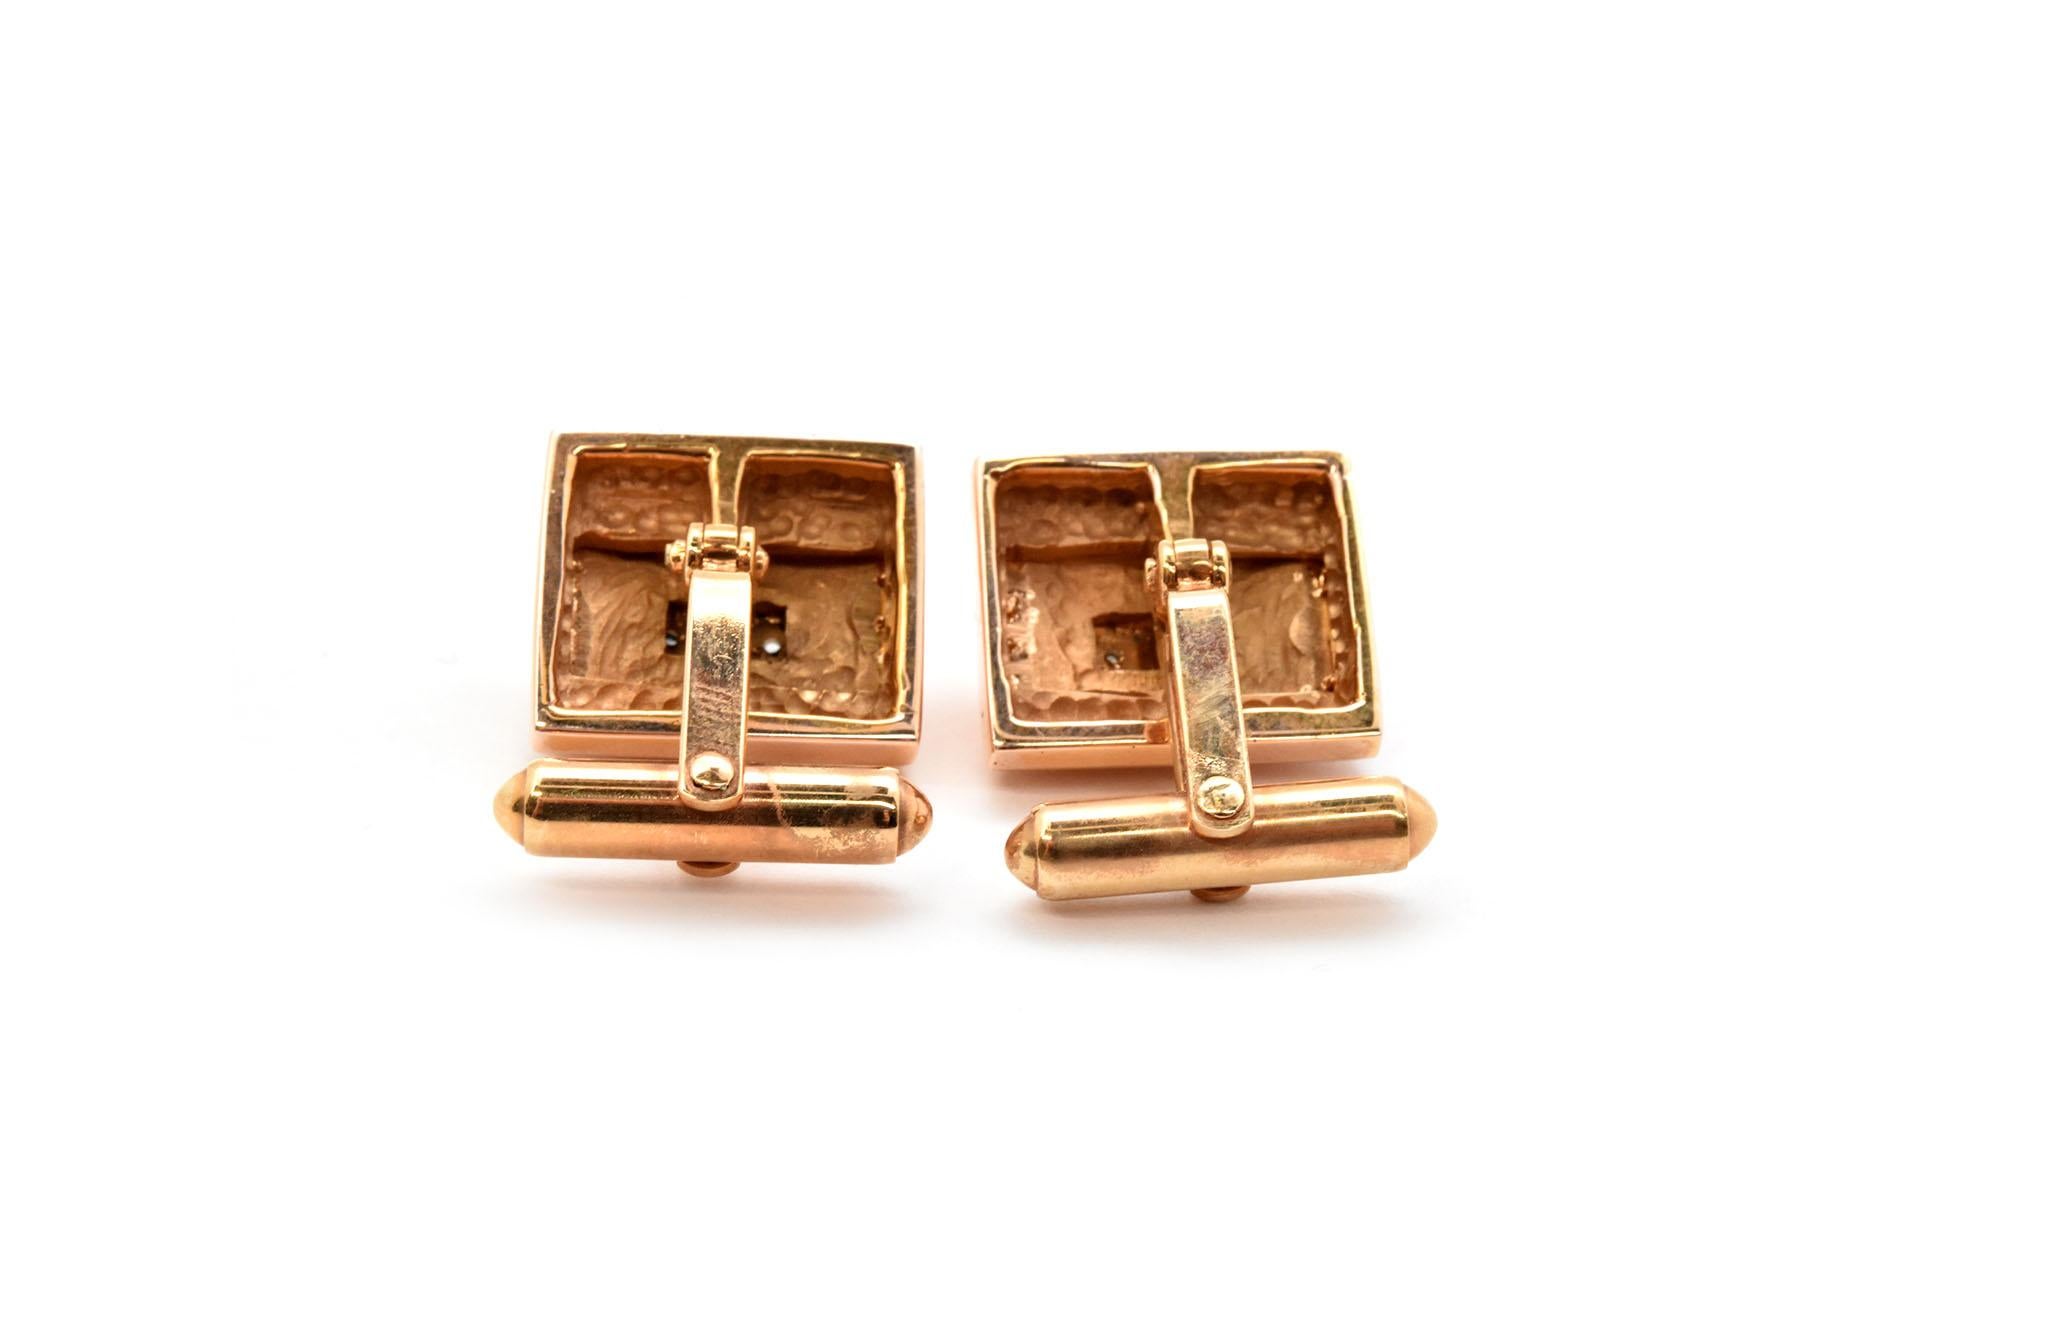 Each cufflink is made in 14k rose gold and set with 2 round brilliant diamonds with a combined weight of 0.18cttw. Each cufflink has a hinged attachment to make them more flexible to the wearer’s cuff. Each rectangular cufflink measures